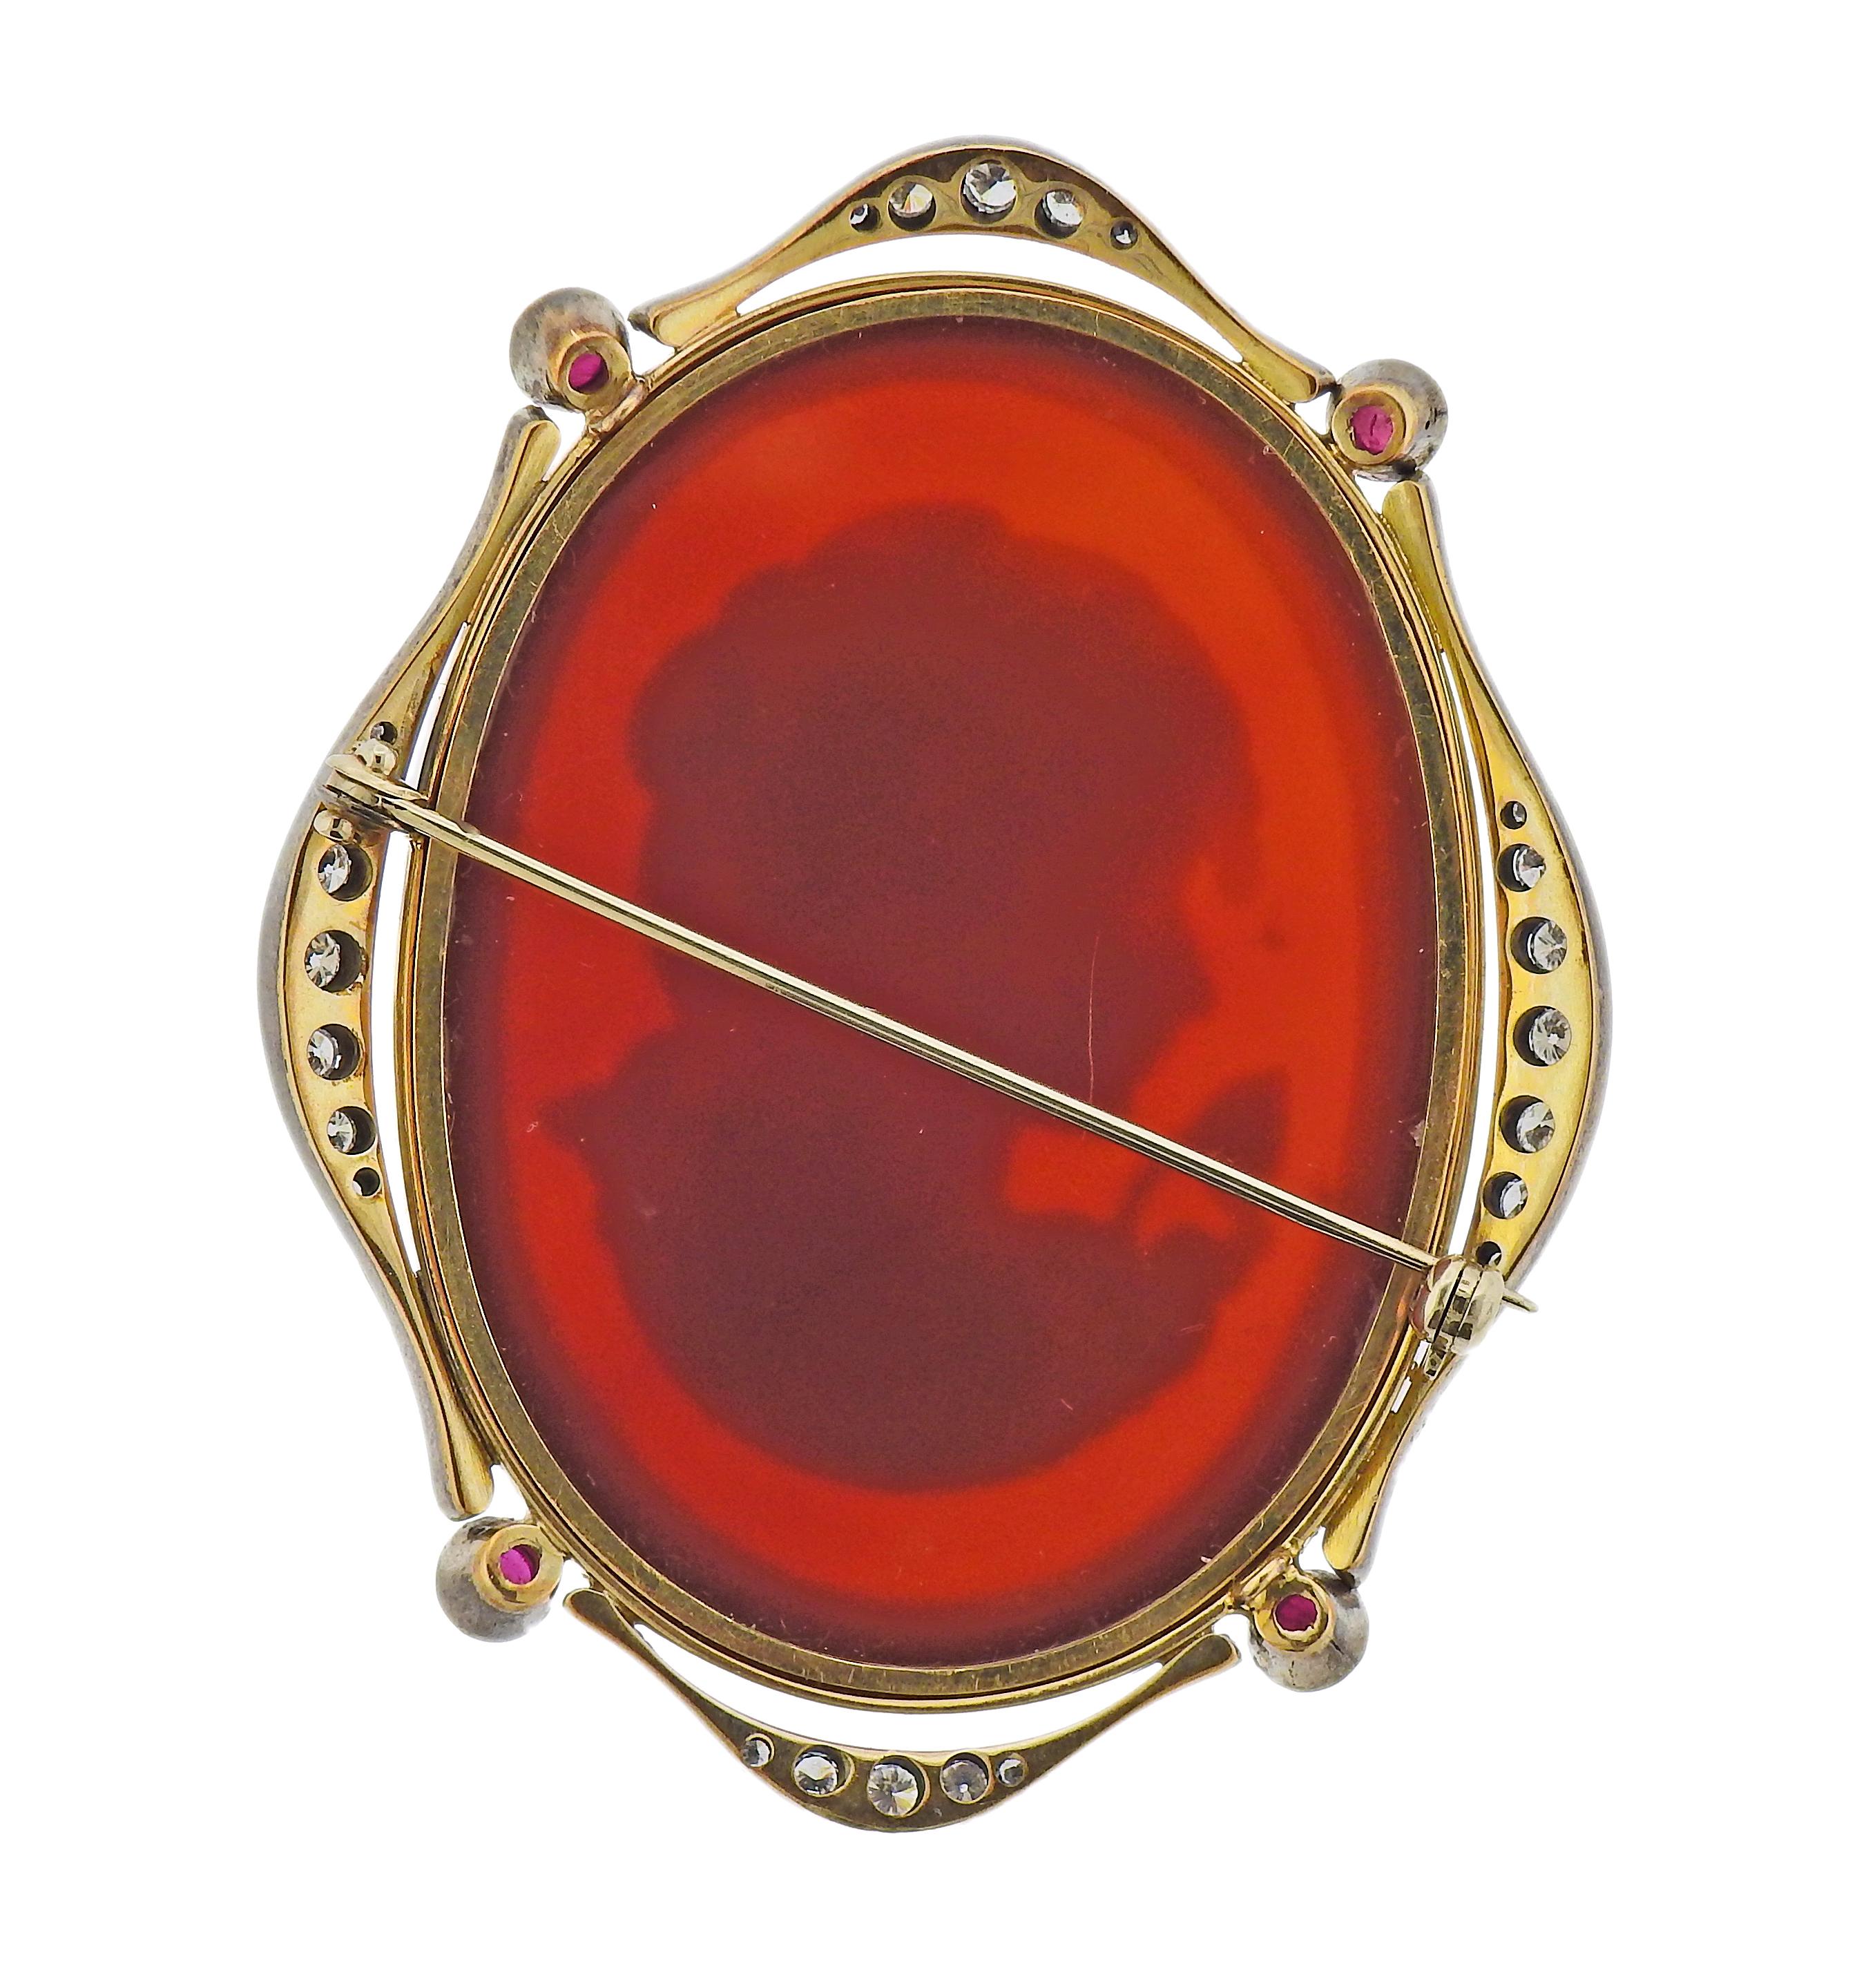 18k gold antique brooch, featuring hardstone cameo, surrounded with 4 rubies and approx. 0.30ctw in diamonds. Brooch is 62mm x 50mm. Tested 18k. Weight - 27.6 grams. 